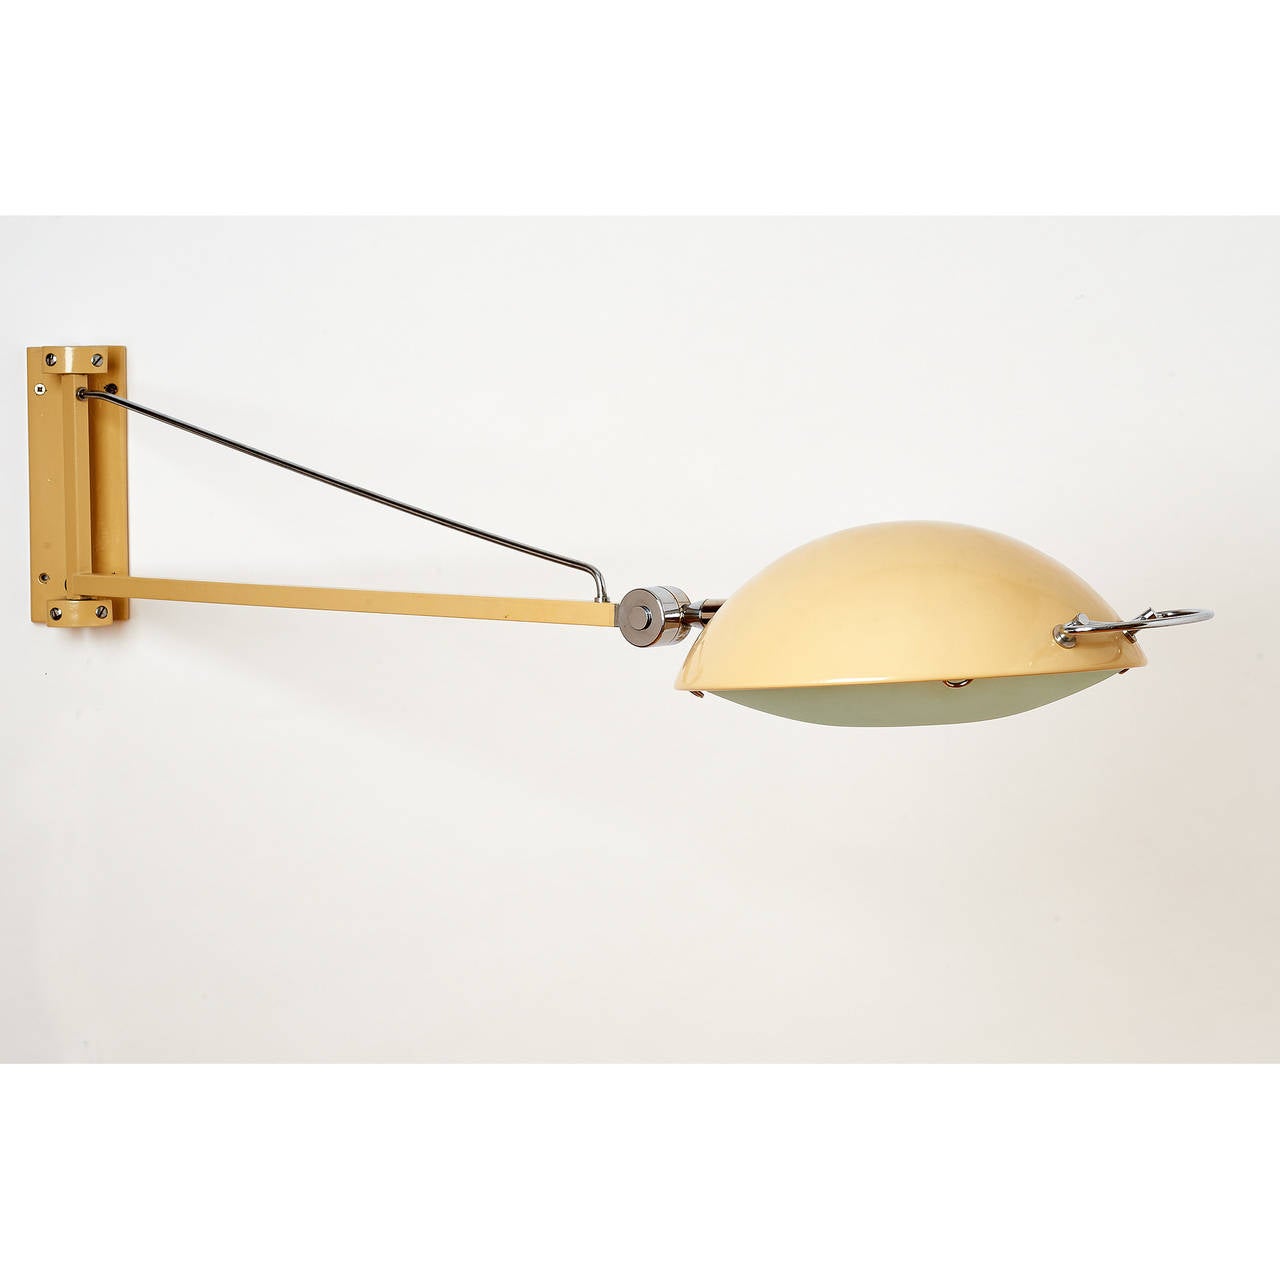 Stilnovo.
Adjusting swing arm sconces.
Enameled metal with glass shade and nickel mounts.
Signed,
Italy, 1950s.

37 long x 11 diameter. Backplate: 8 x 2.5

Rewired for use in the U.S. with one standard base bulb.